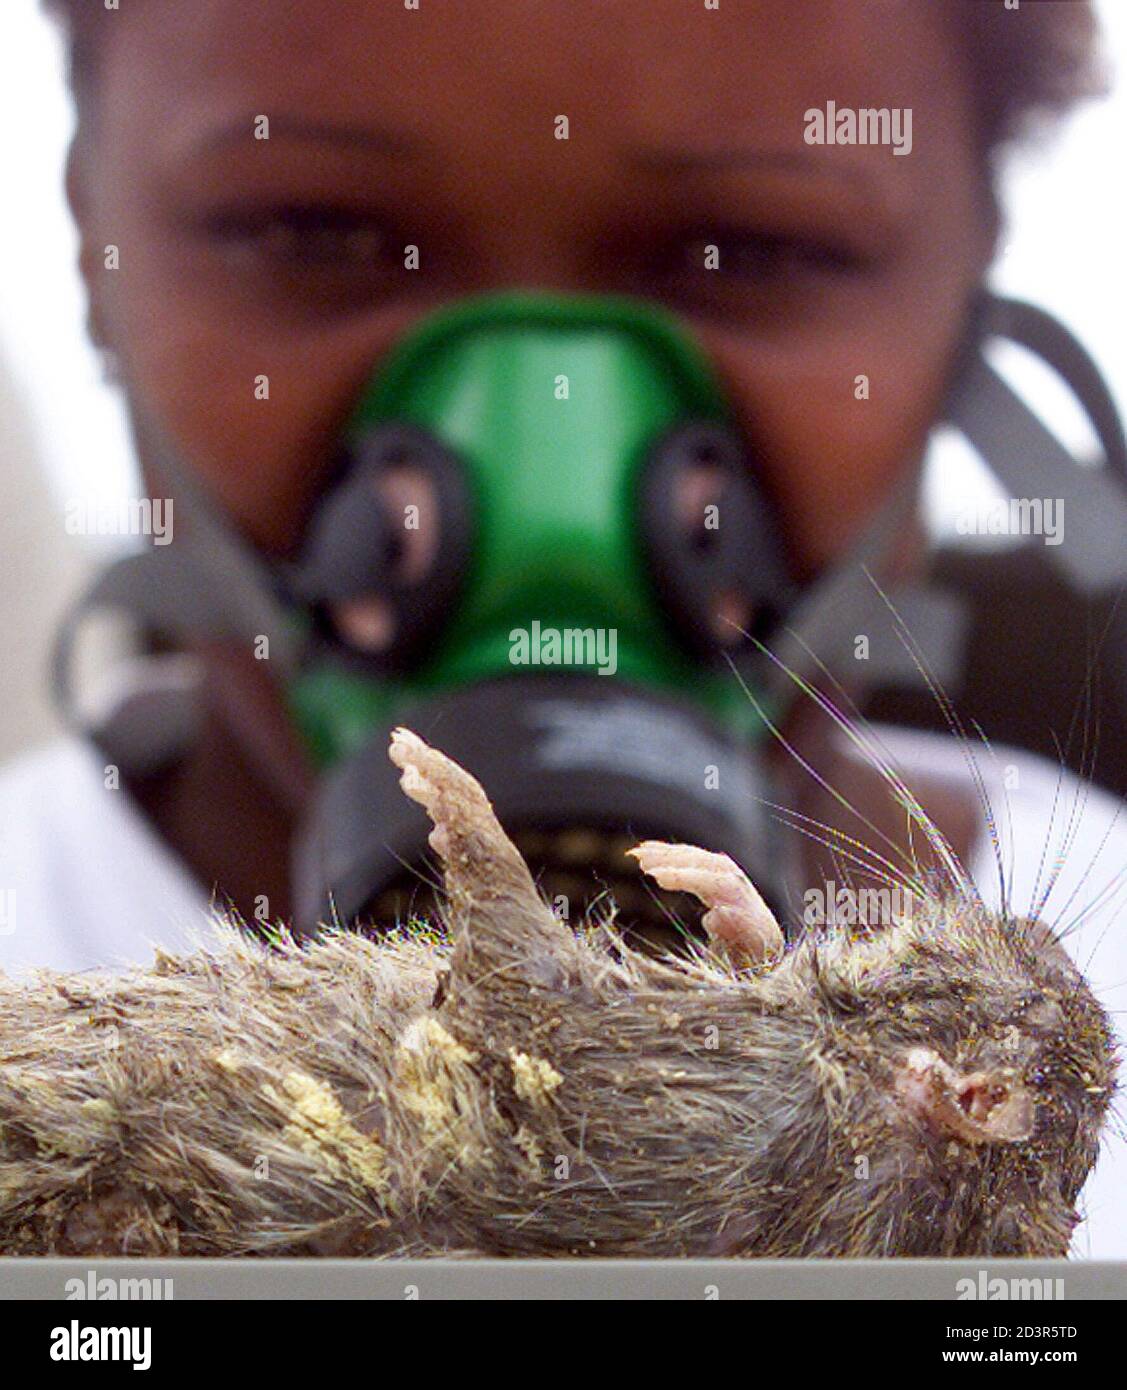 Monica Penna, a public health worker for the municipality of Caxias,  examines a rat as it sits on scales in this city north of Rio de Janeiro,  November 29, 2001. The local